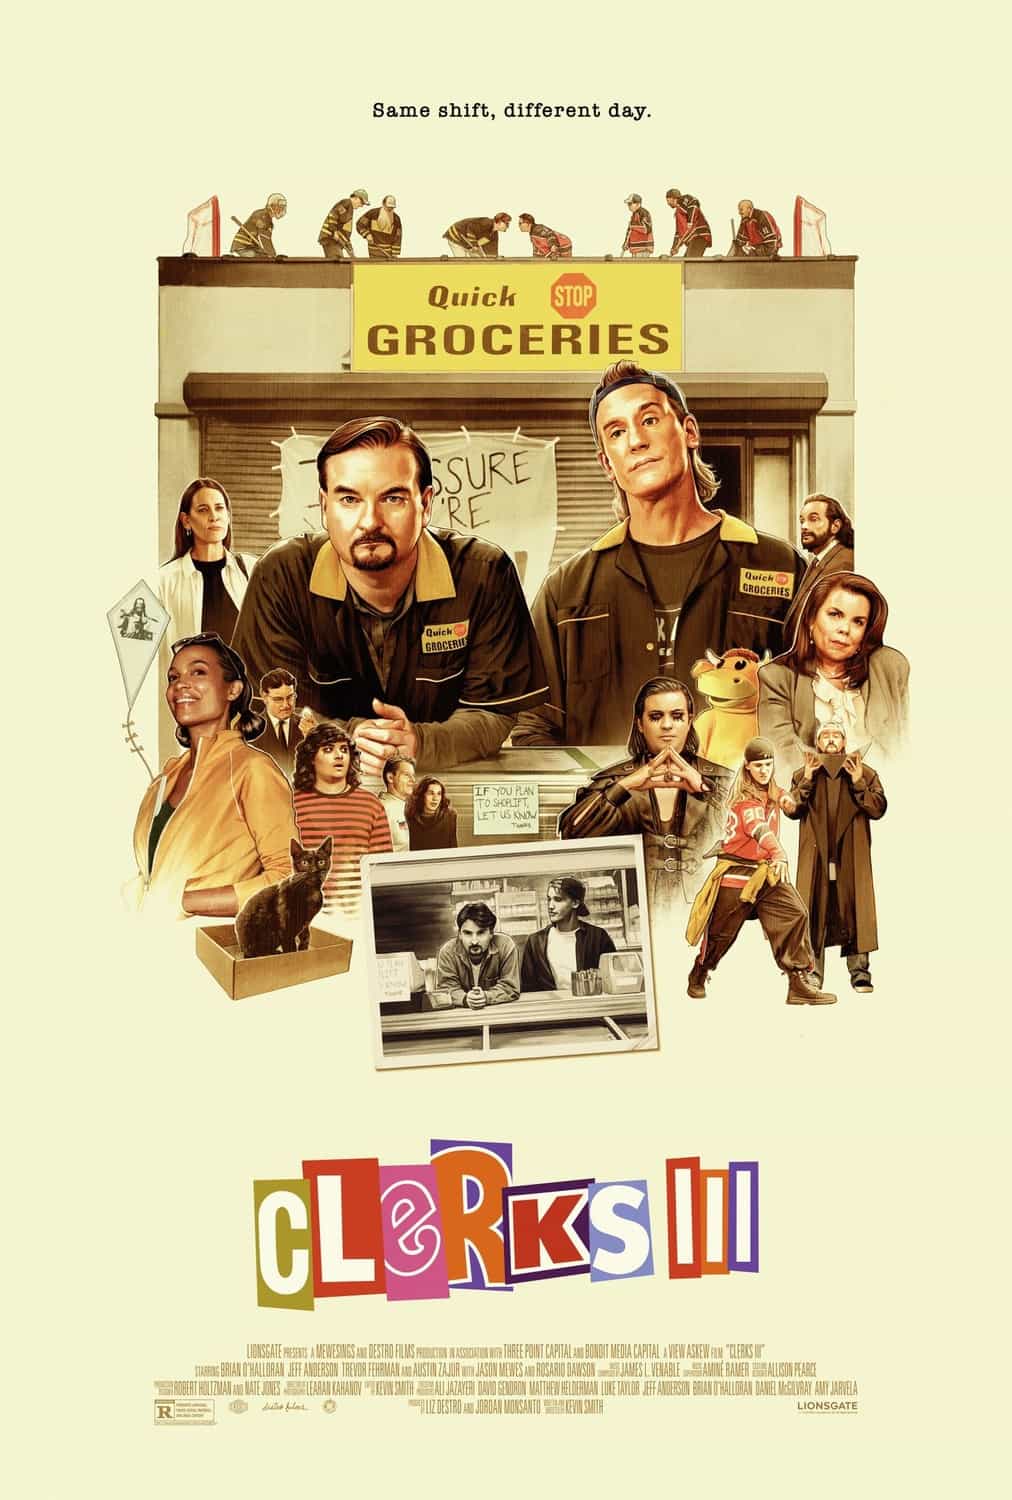 Clerks III has been given a 15 age rating in the UK for strong language, sex references, drug misuse